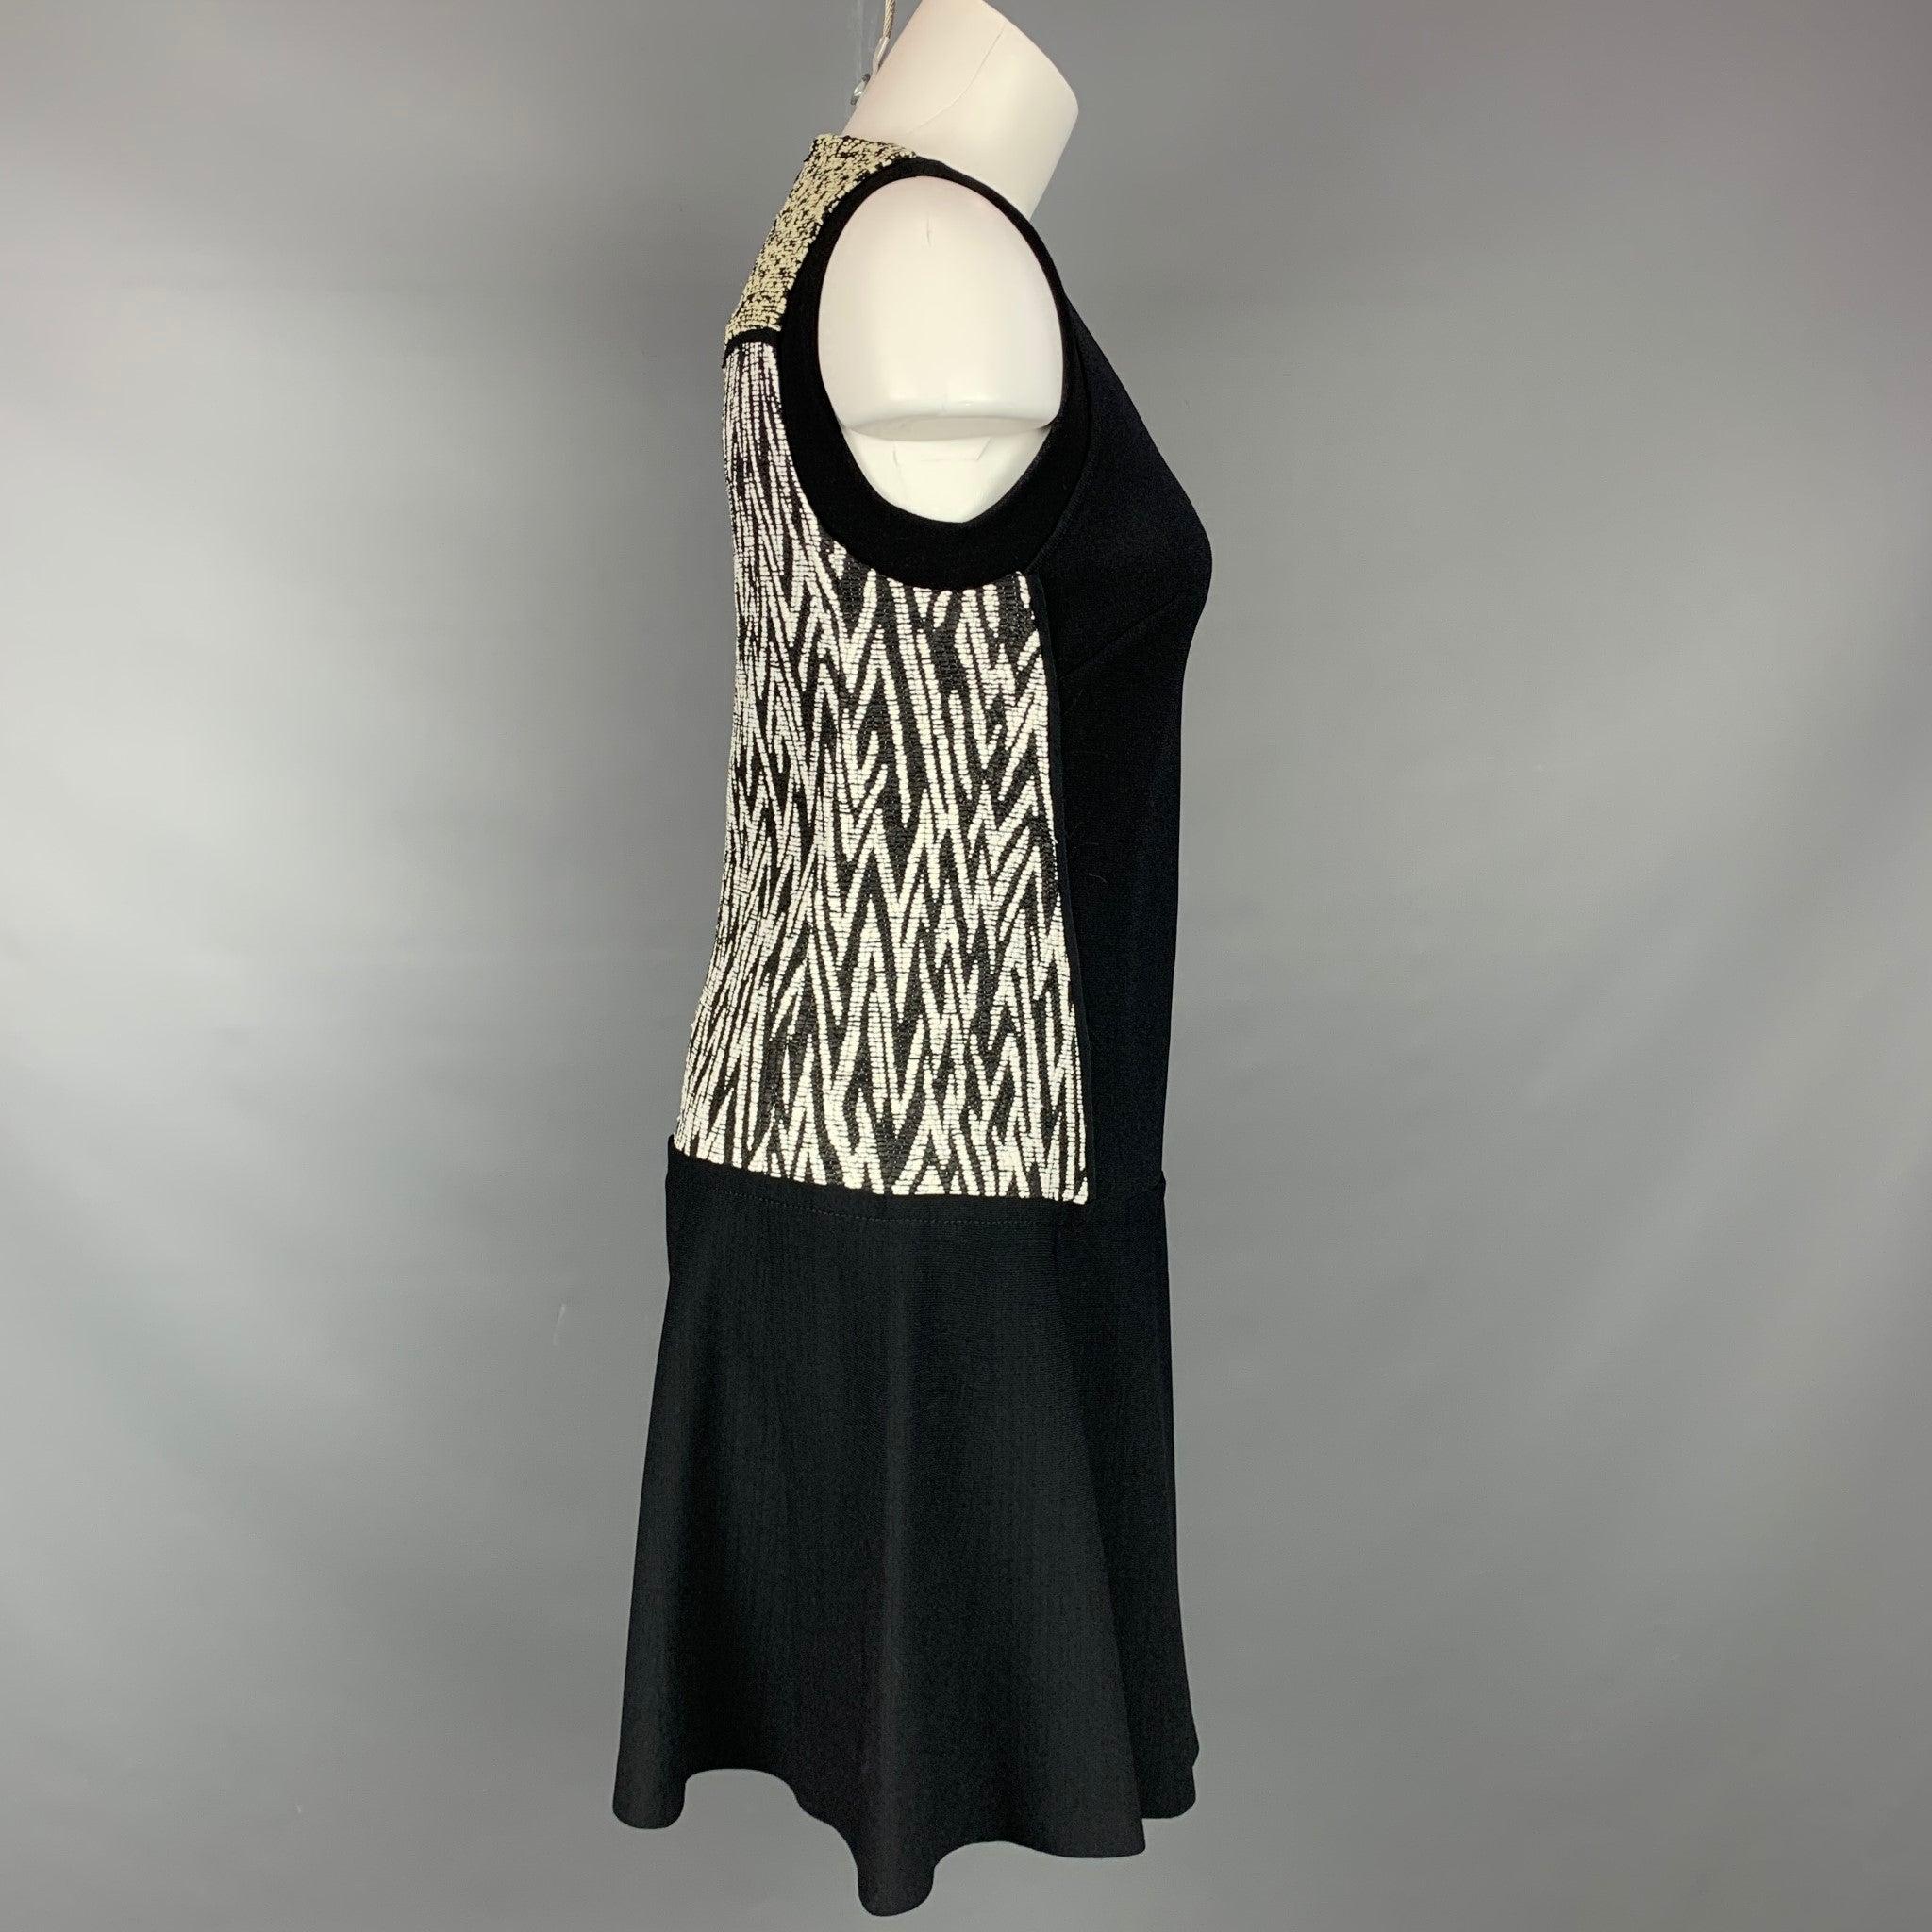 PROENZA SCHOULER Size 6 Black & White Acrylic Blend Sleeveless A-line Dress In Good Condition For Sale In San Francisco, CA